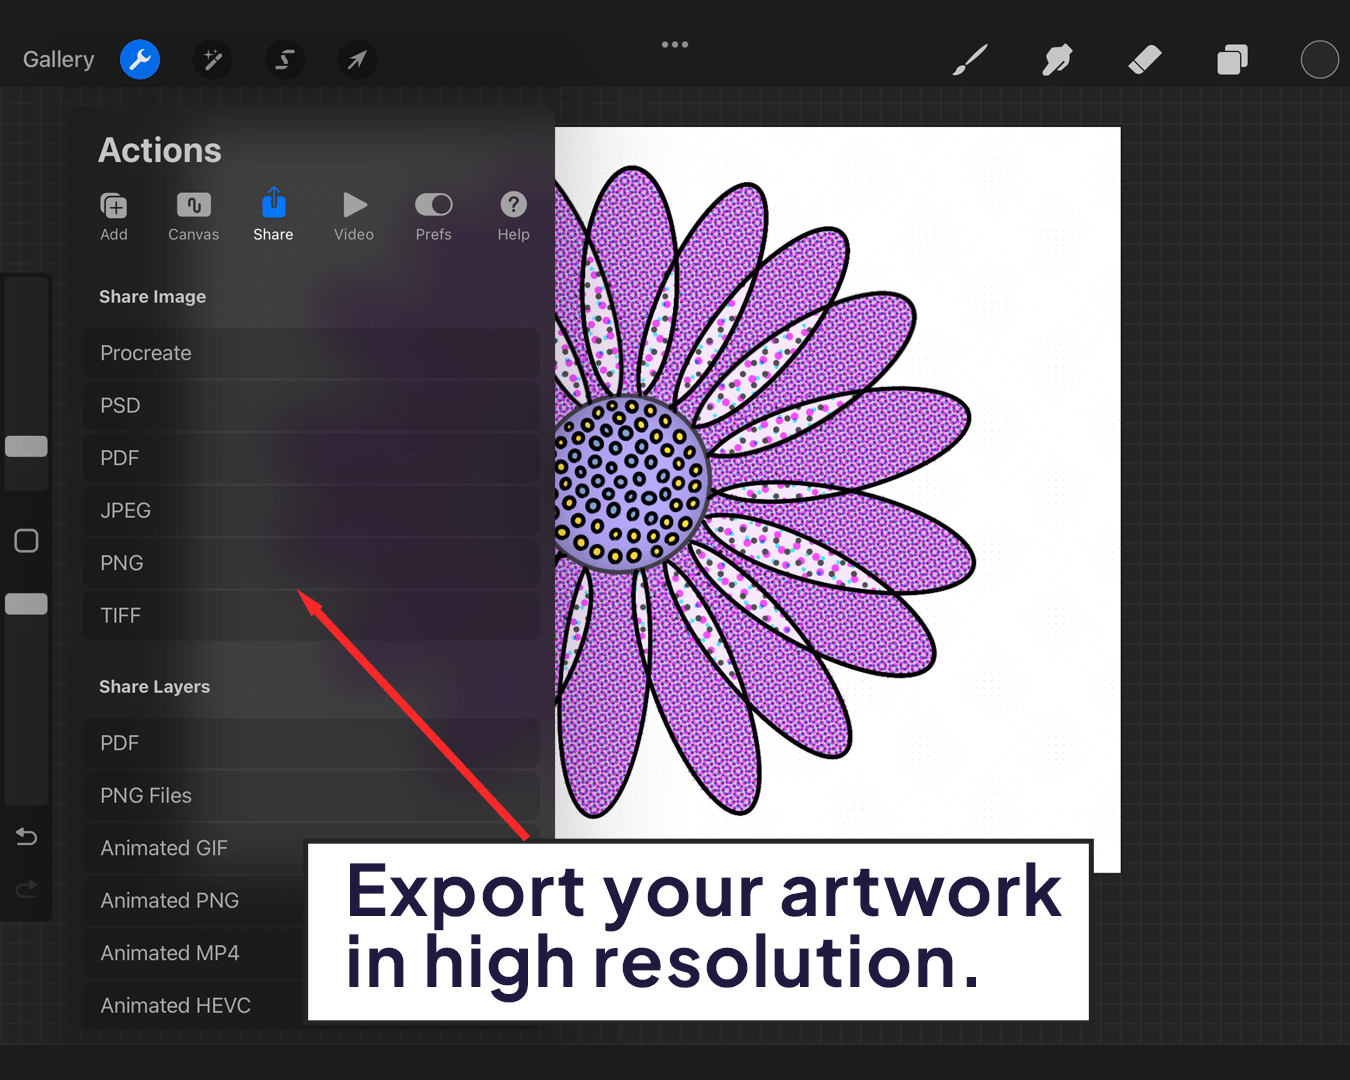 Exporting the artwork in high resolution